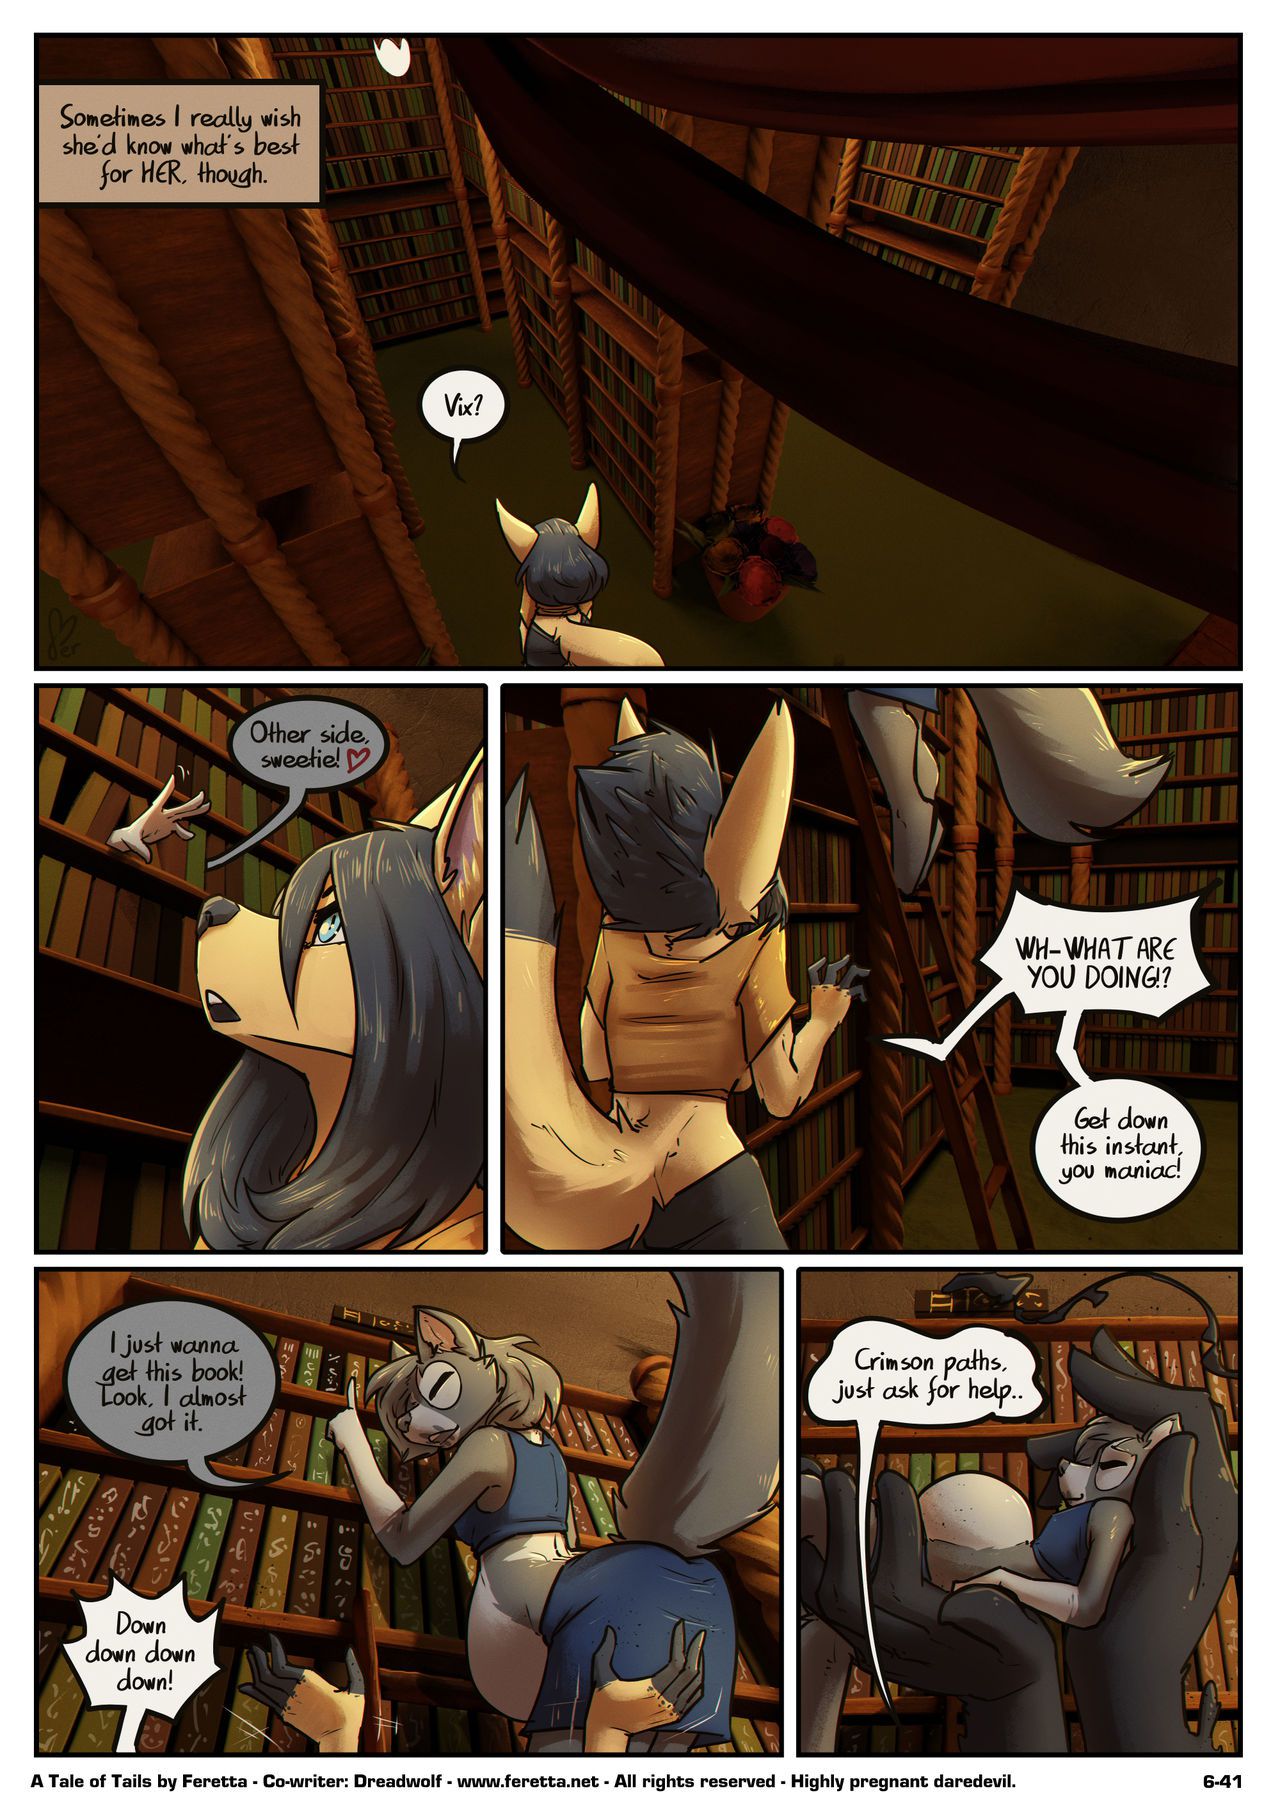 [Feretta] Farellian Legends: A Tale of Tails (w/Extras) [Ongoing] 336